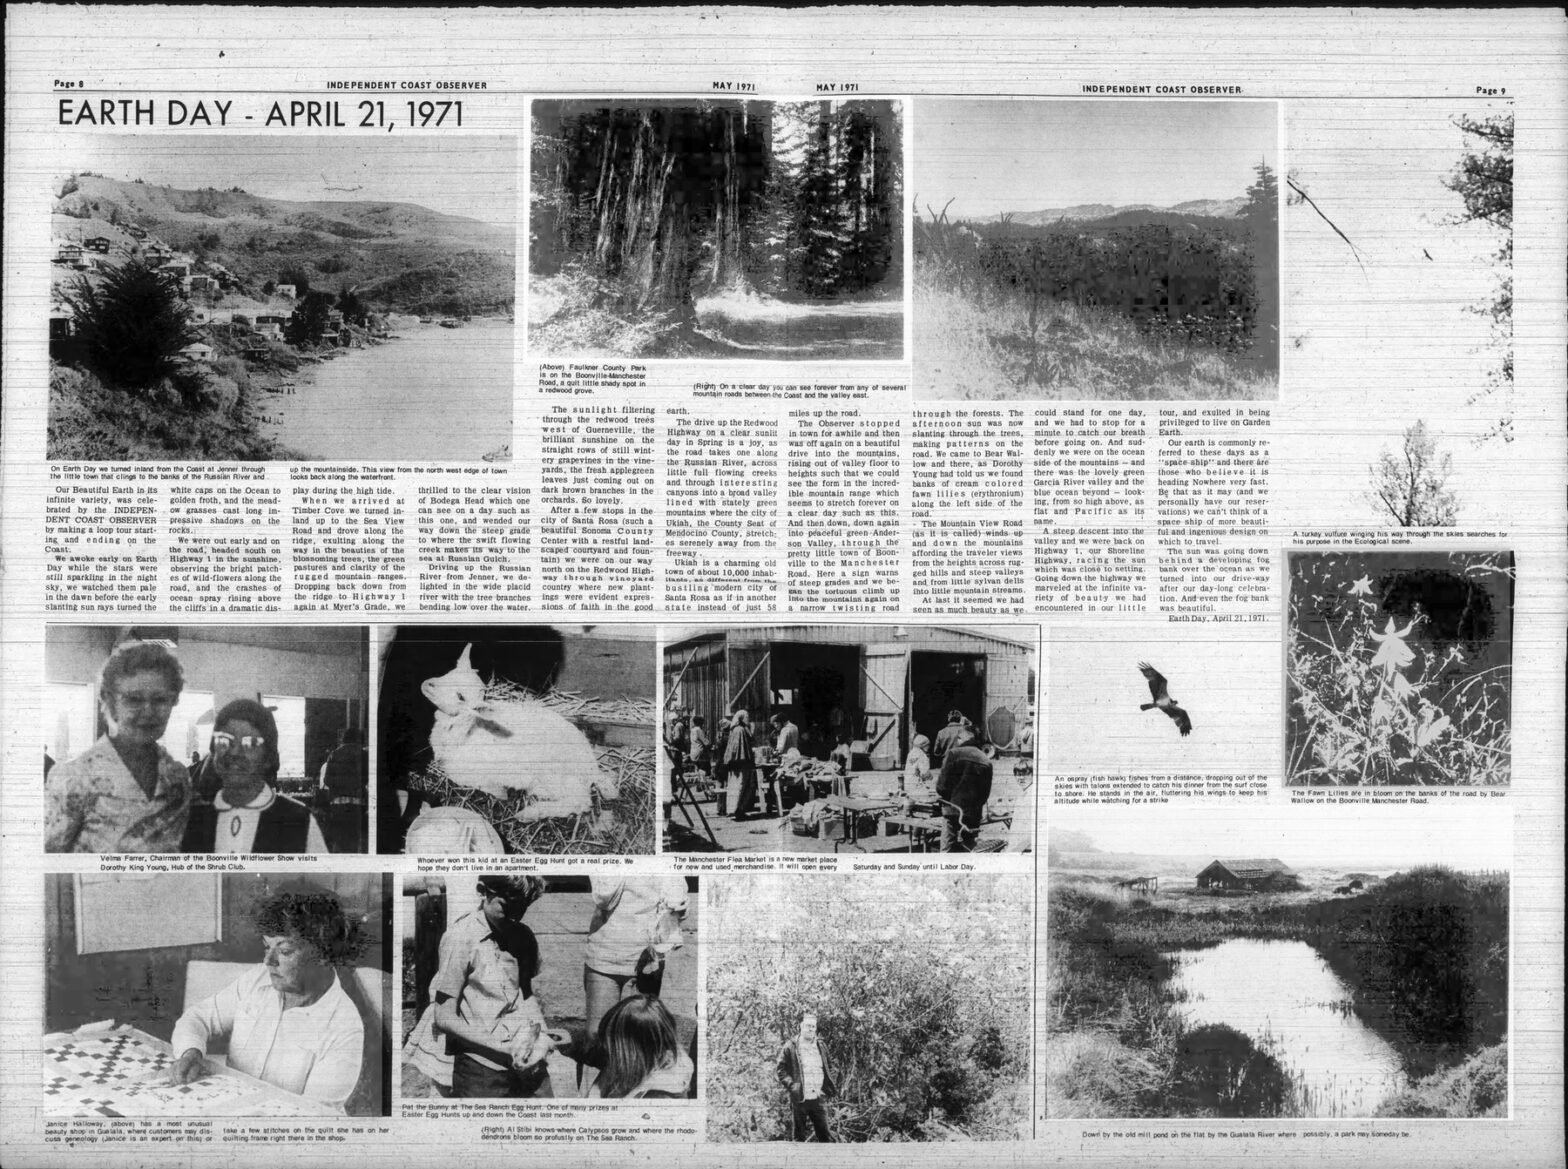 Earth Day 1971 from the Independent Coast Observer - used with permission and they retain all rights.